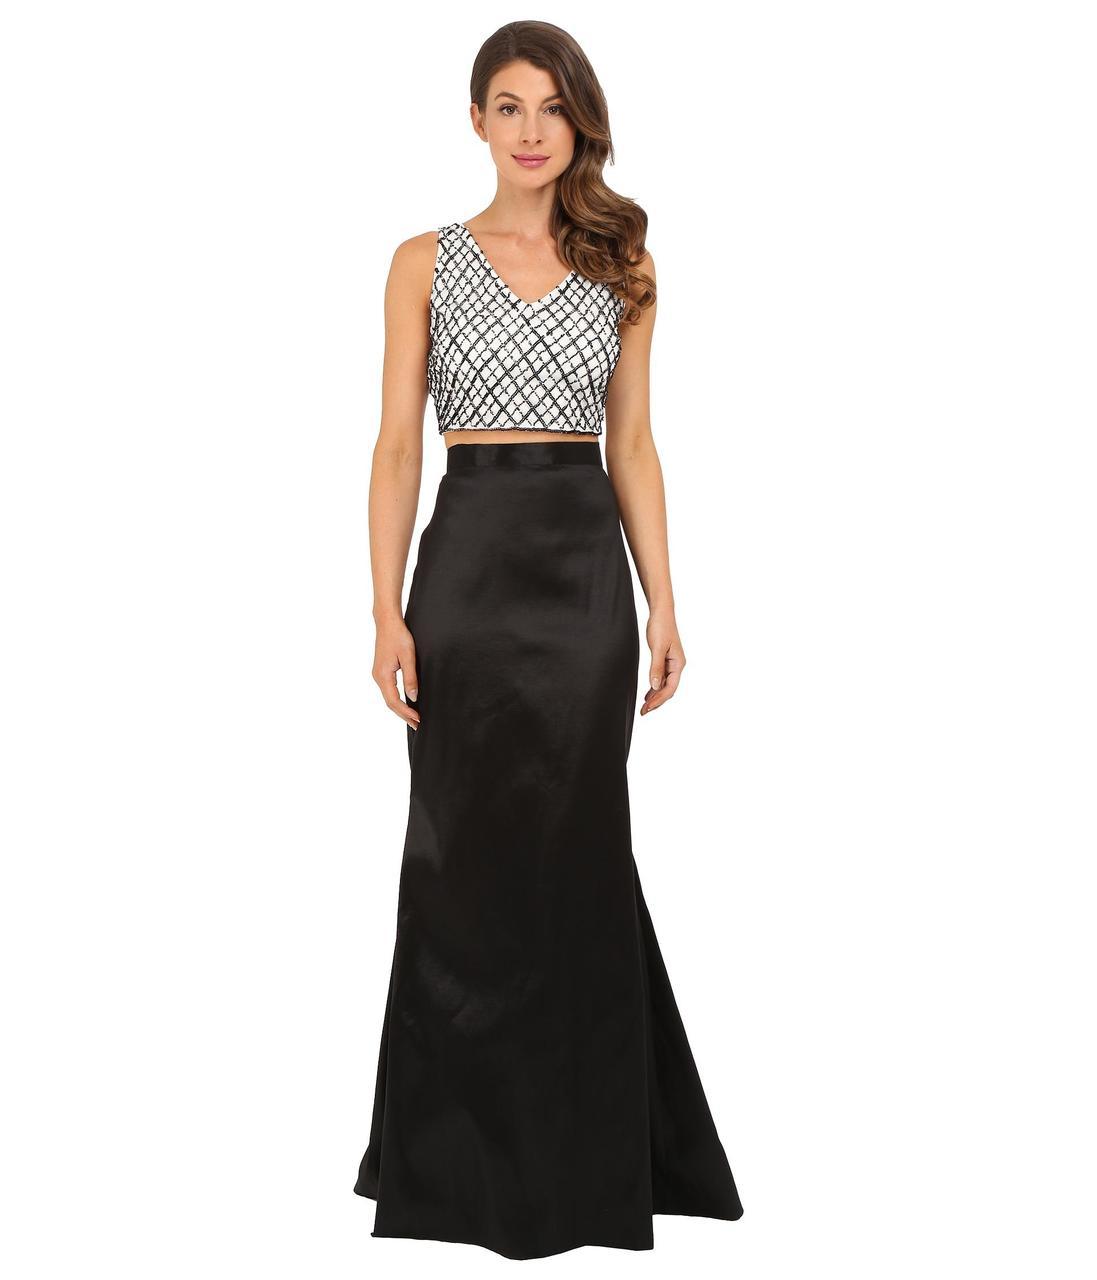  Adrianna Papell-Special Occasion Dress-COLOR-Ivory Black